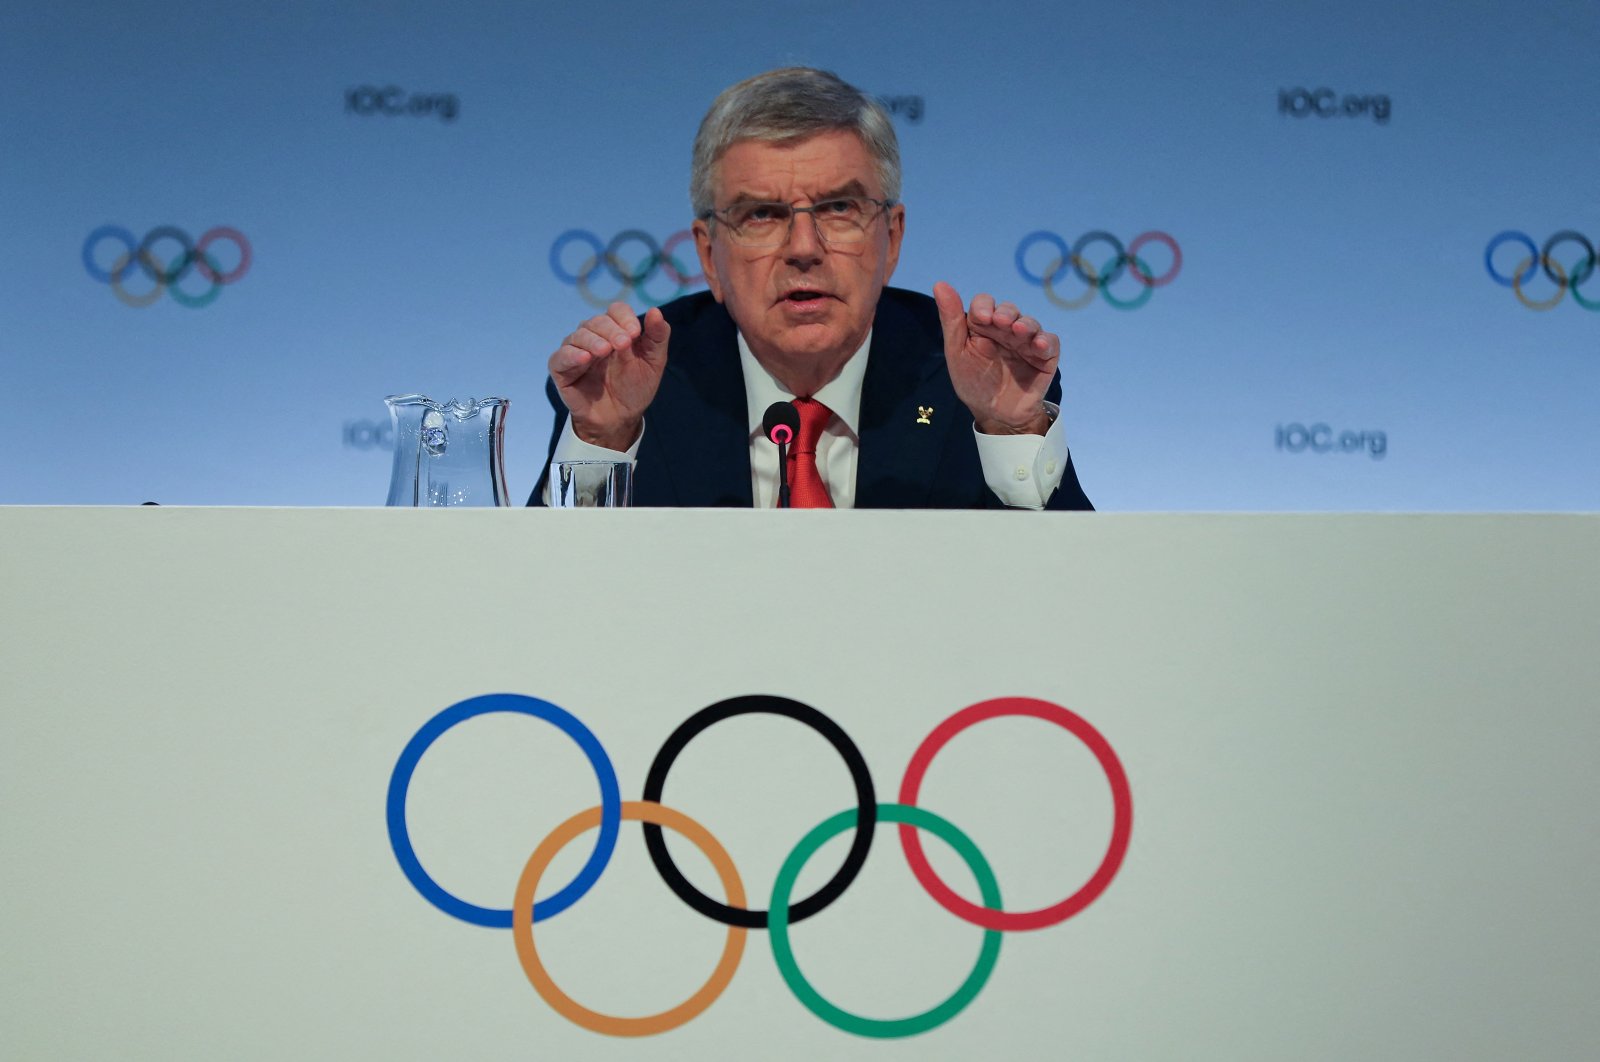 International Olympic Committee (IOC) President Thomas Bach gestures as he speaks during a news conference, ahead of the 141st IOC Session, Mumbai, India, Oct. 13, 2023. (Reuters Photo)